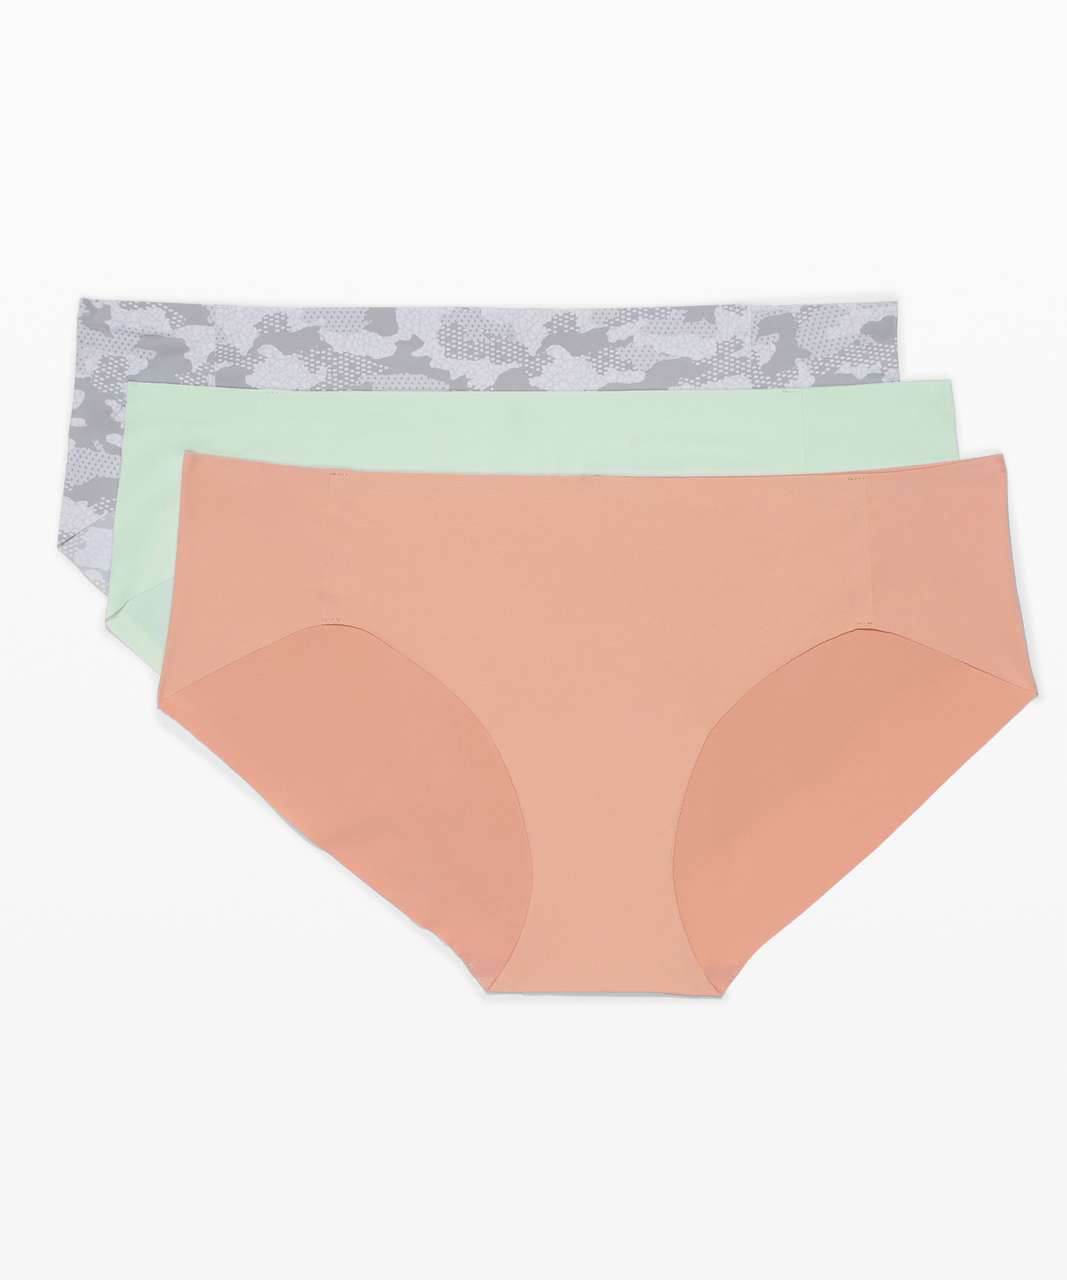 Lululemon Smooth Seamless Hipster 3 Pack - Collage Camo Mini Serene Blue Multi Rotated 90 / Delicate Mint / Pink Pastel